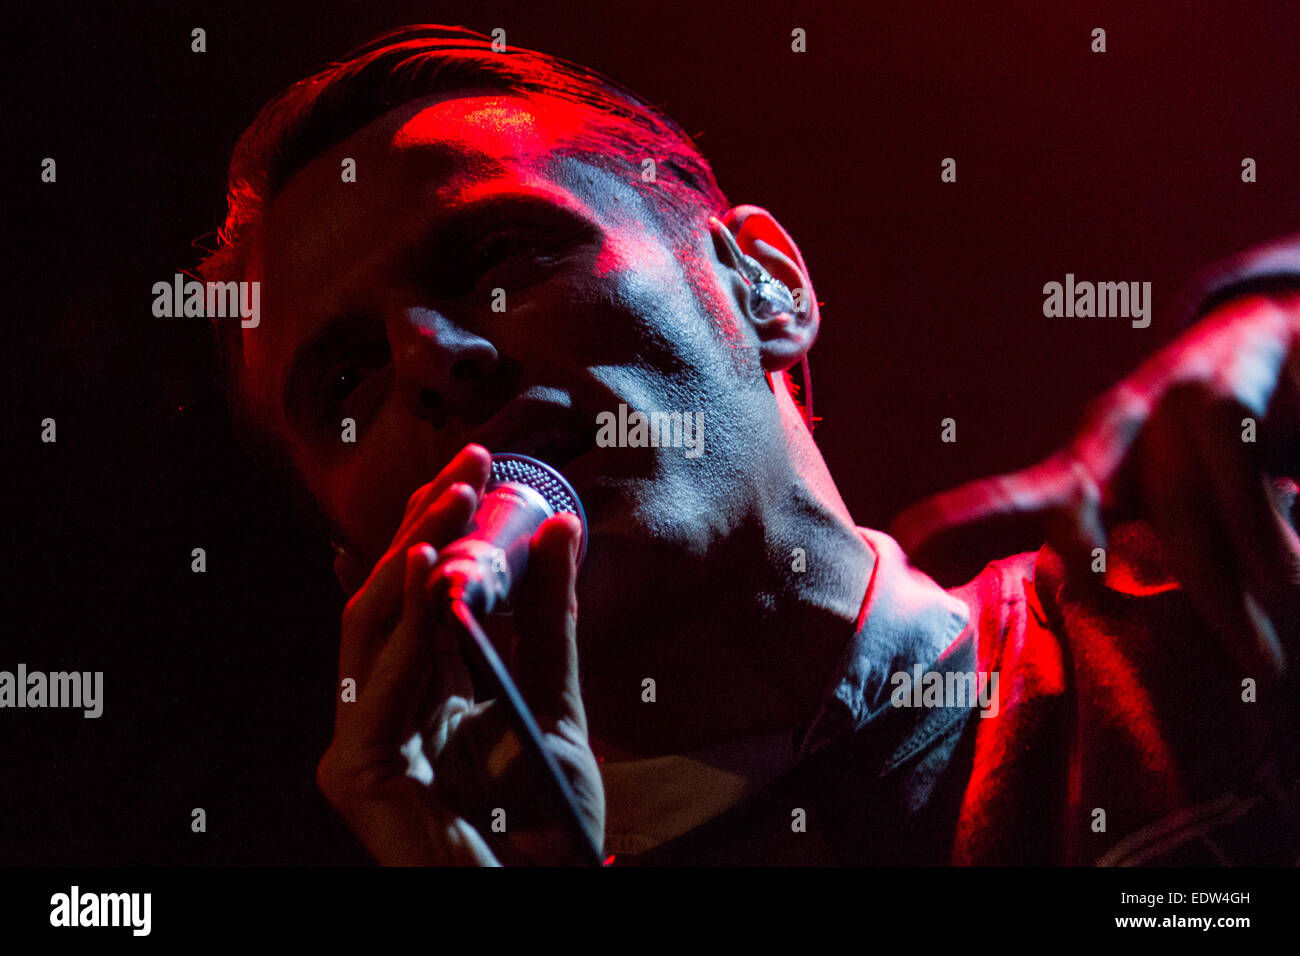 Page 2 - Italian Rapper High Resolution Stock Photography and Images - Alamy